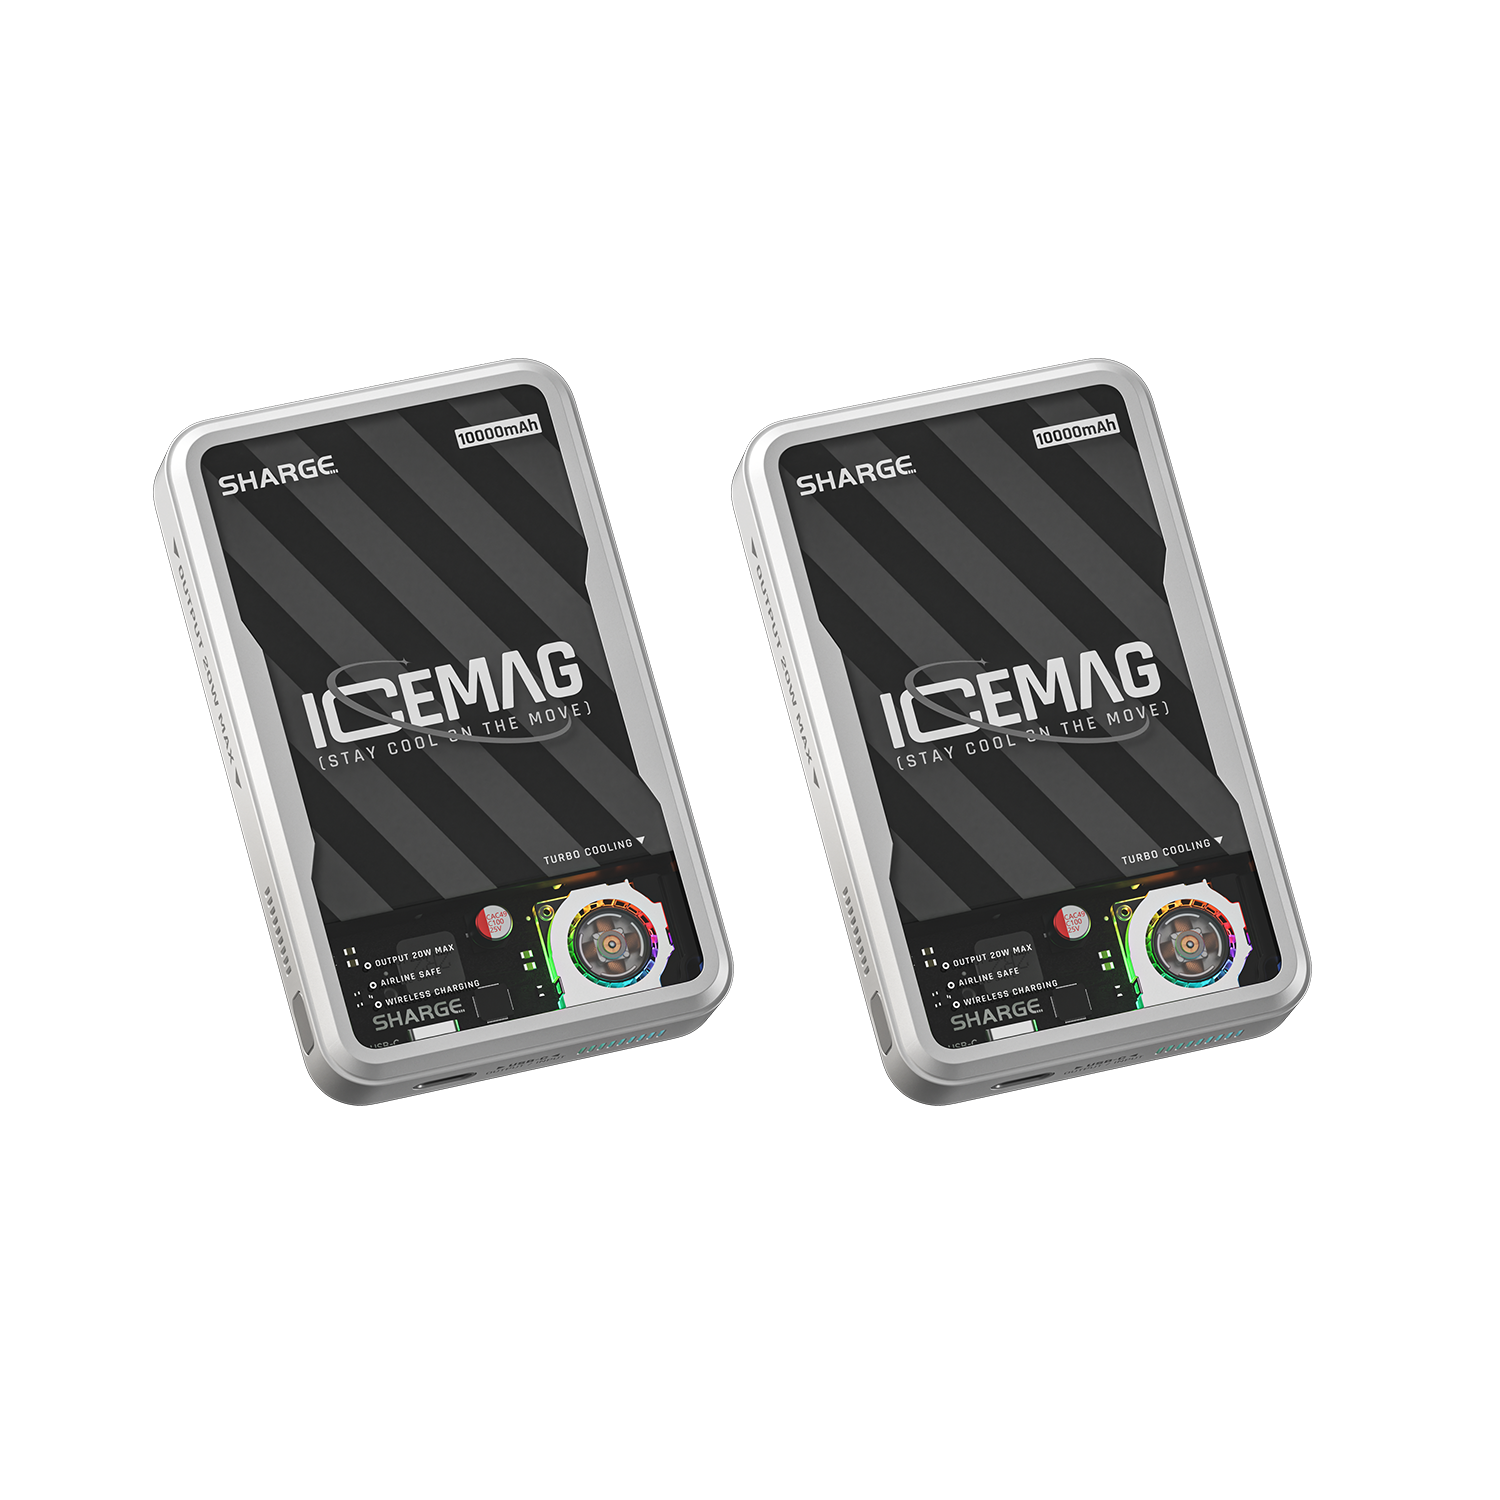 Wireless Power Duo: ICEMAG x 2